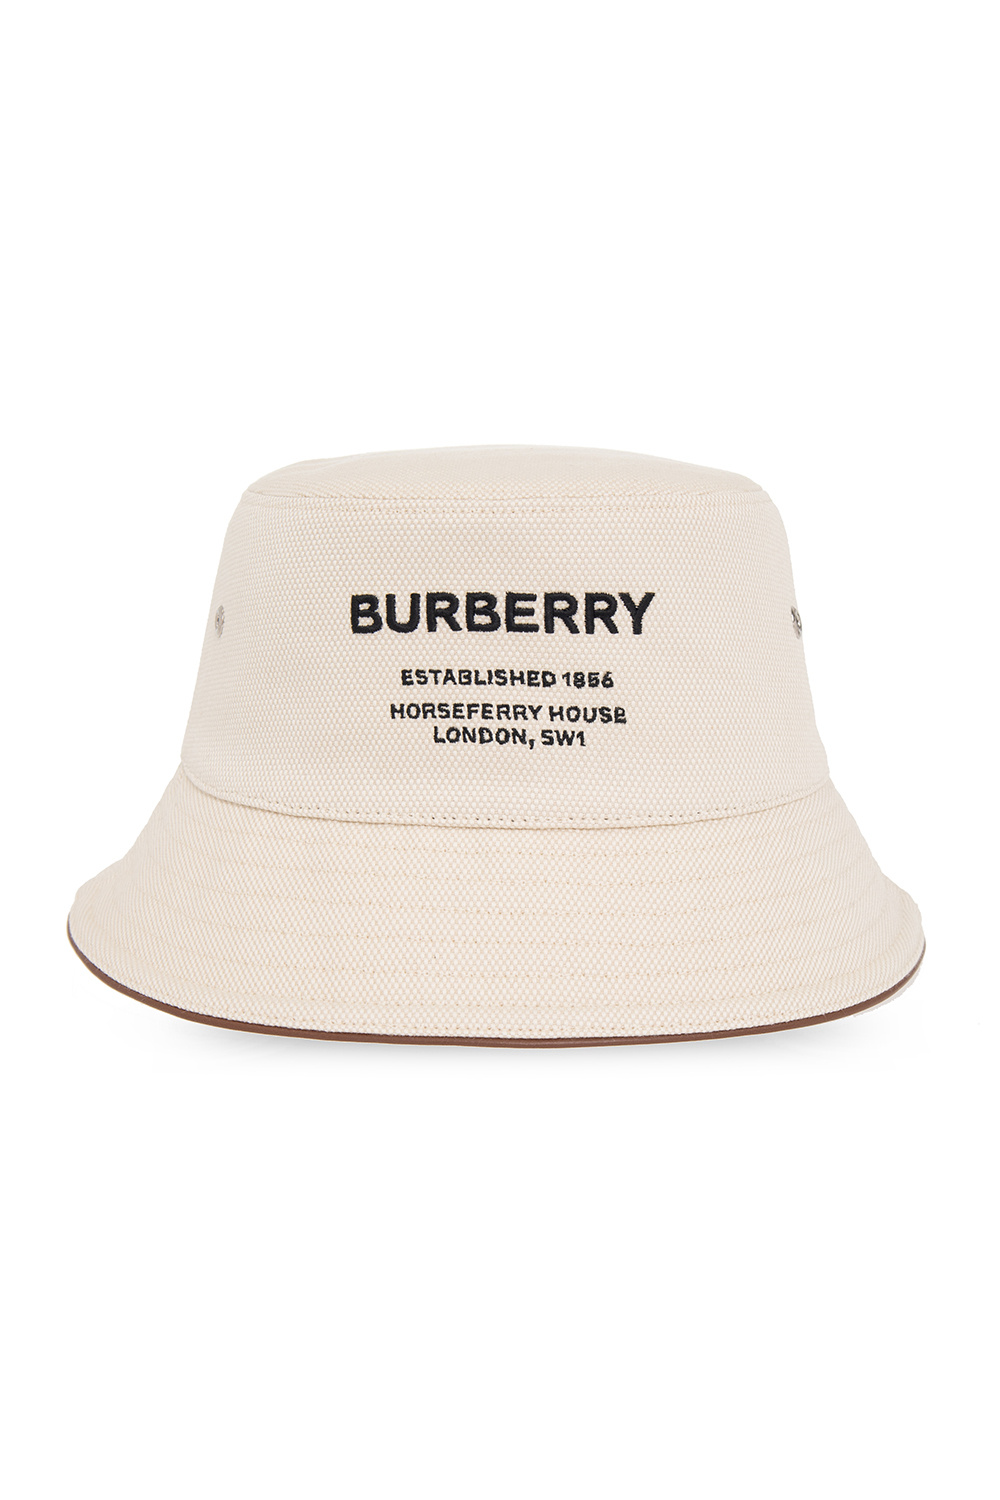 Burberry New Era MLB Sky Blue Undervisor 59FIFTY Fitted Hats to Match the Air Jordan 4 University Blue